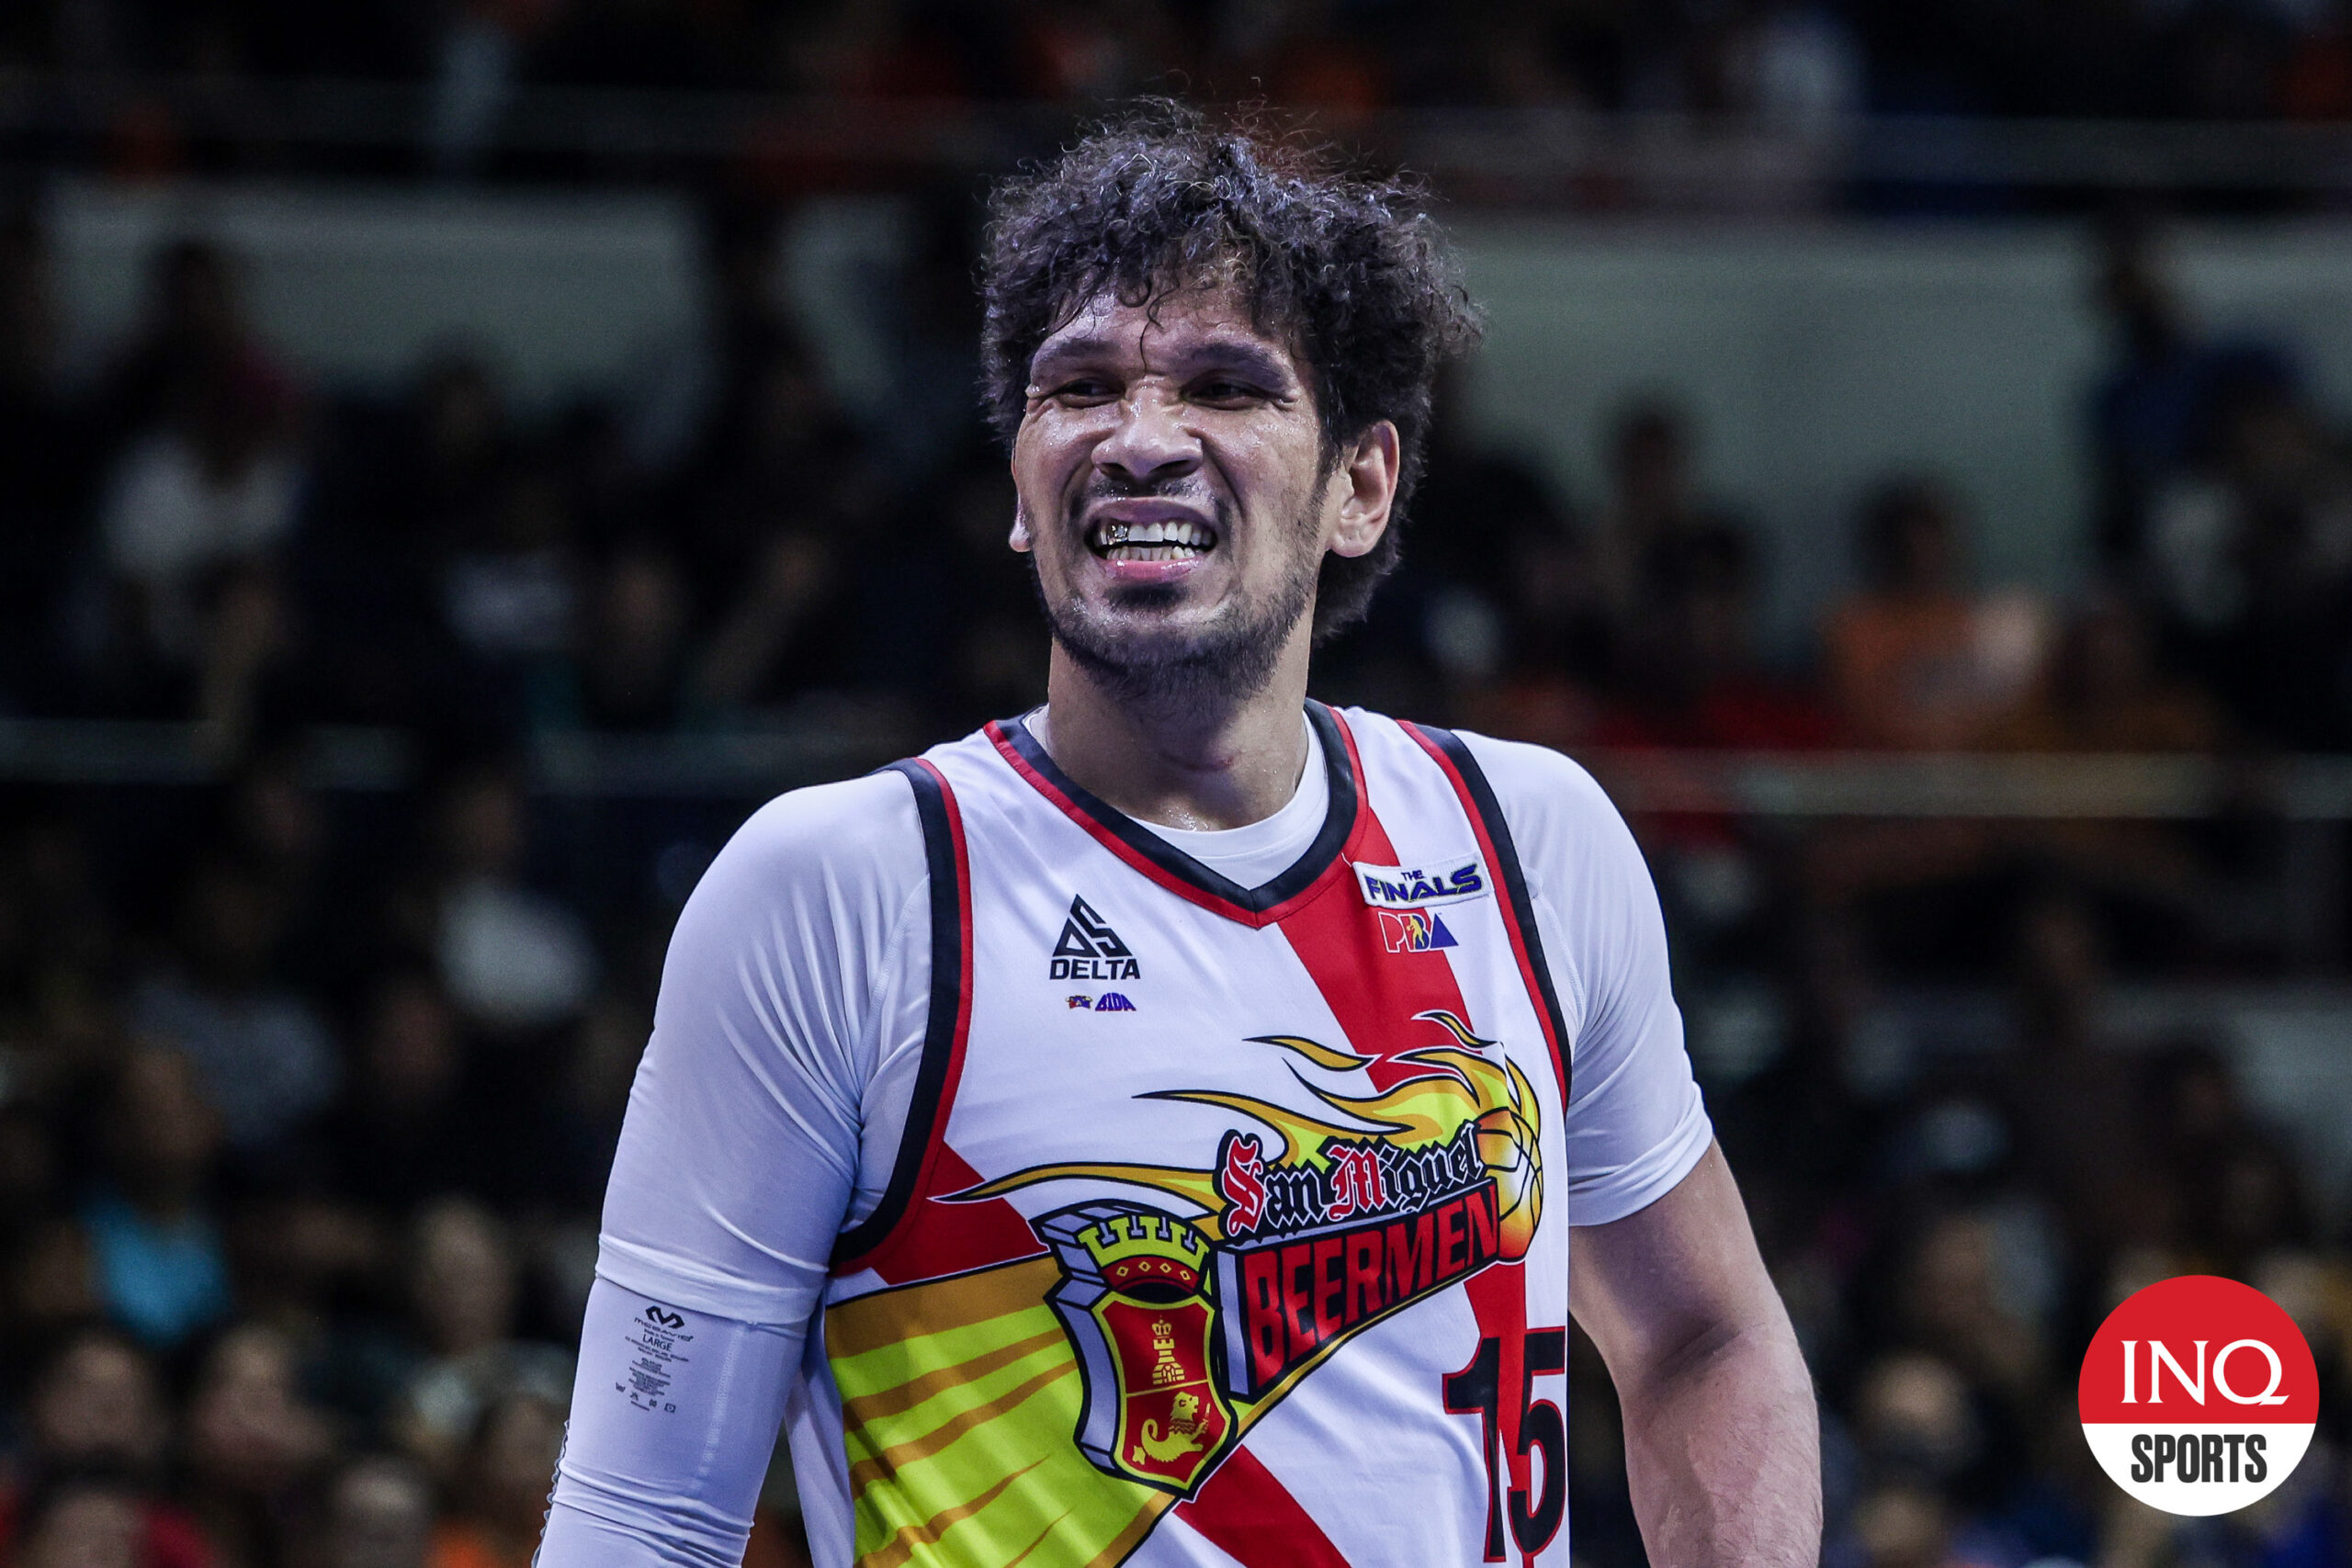 San Miguel Beermen center June Mar Fajardo steers his team in Game 4 of the PBA Philippine Cup Finals against Meralco Bolts.